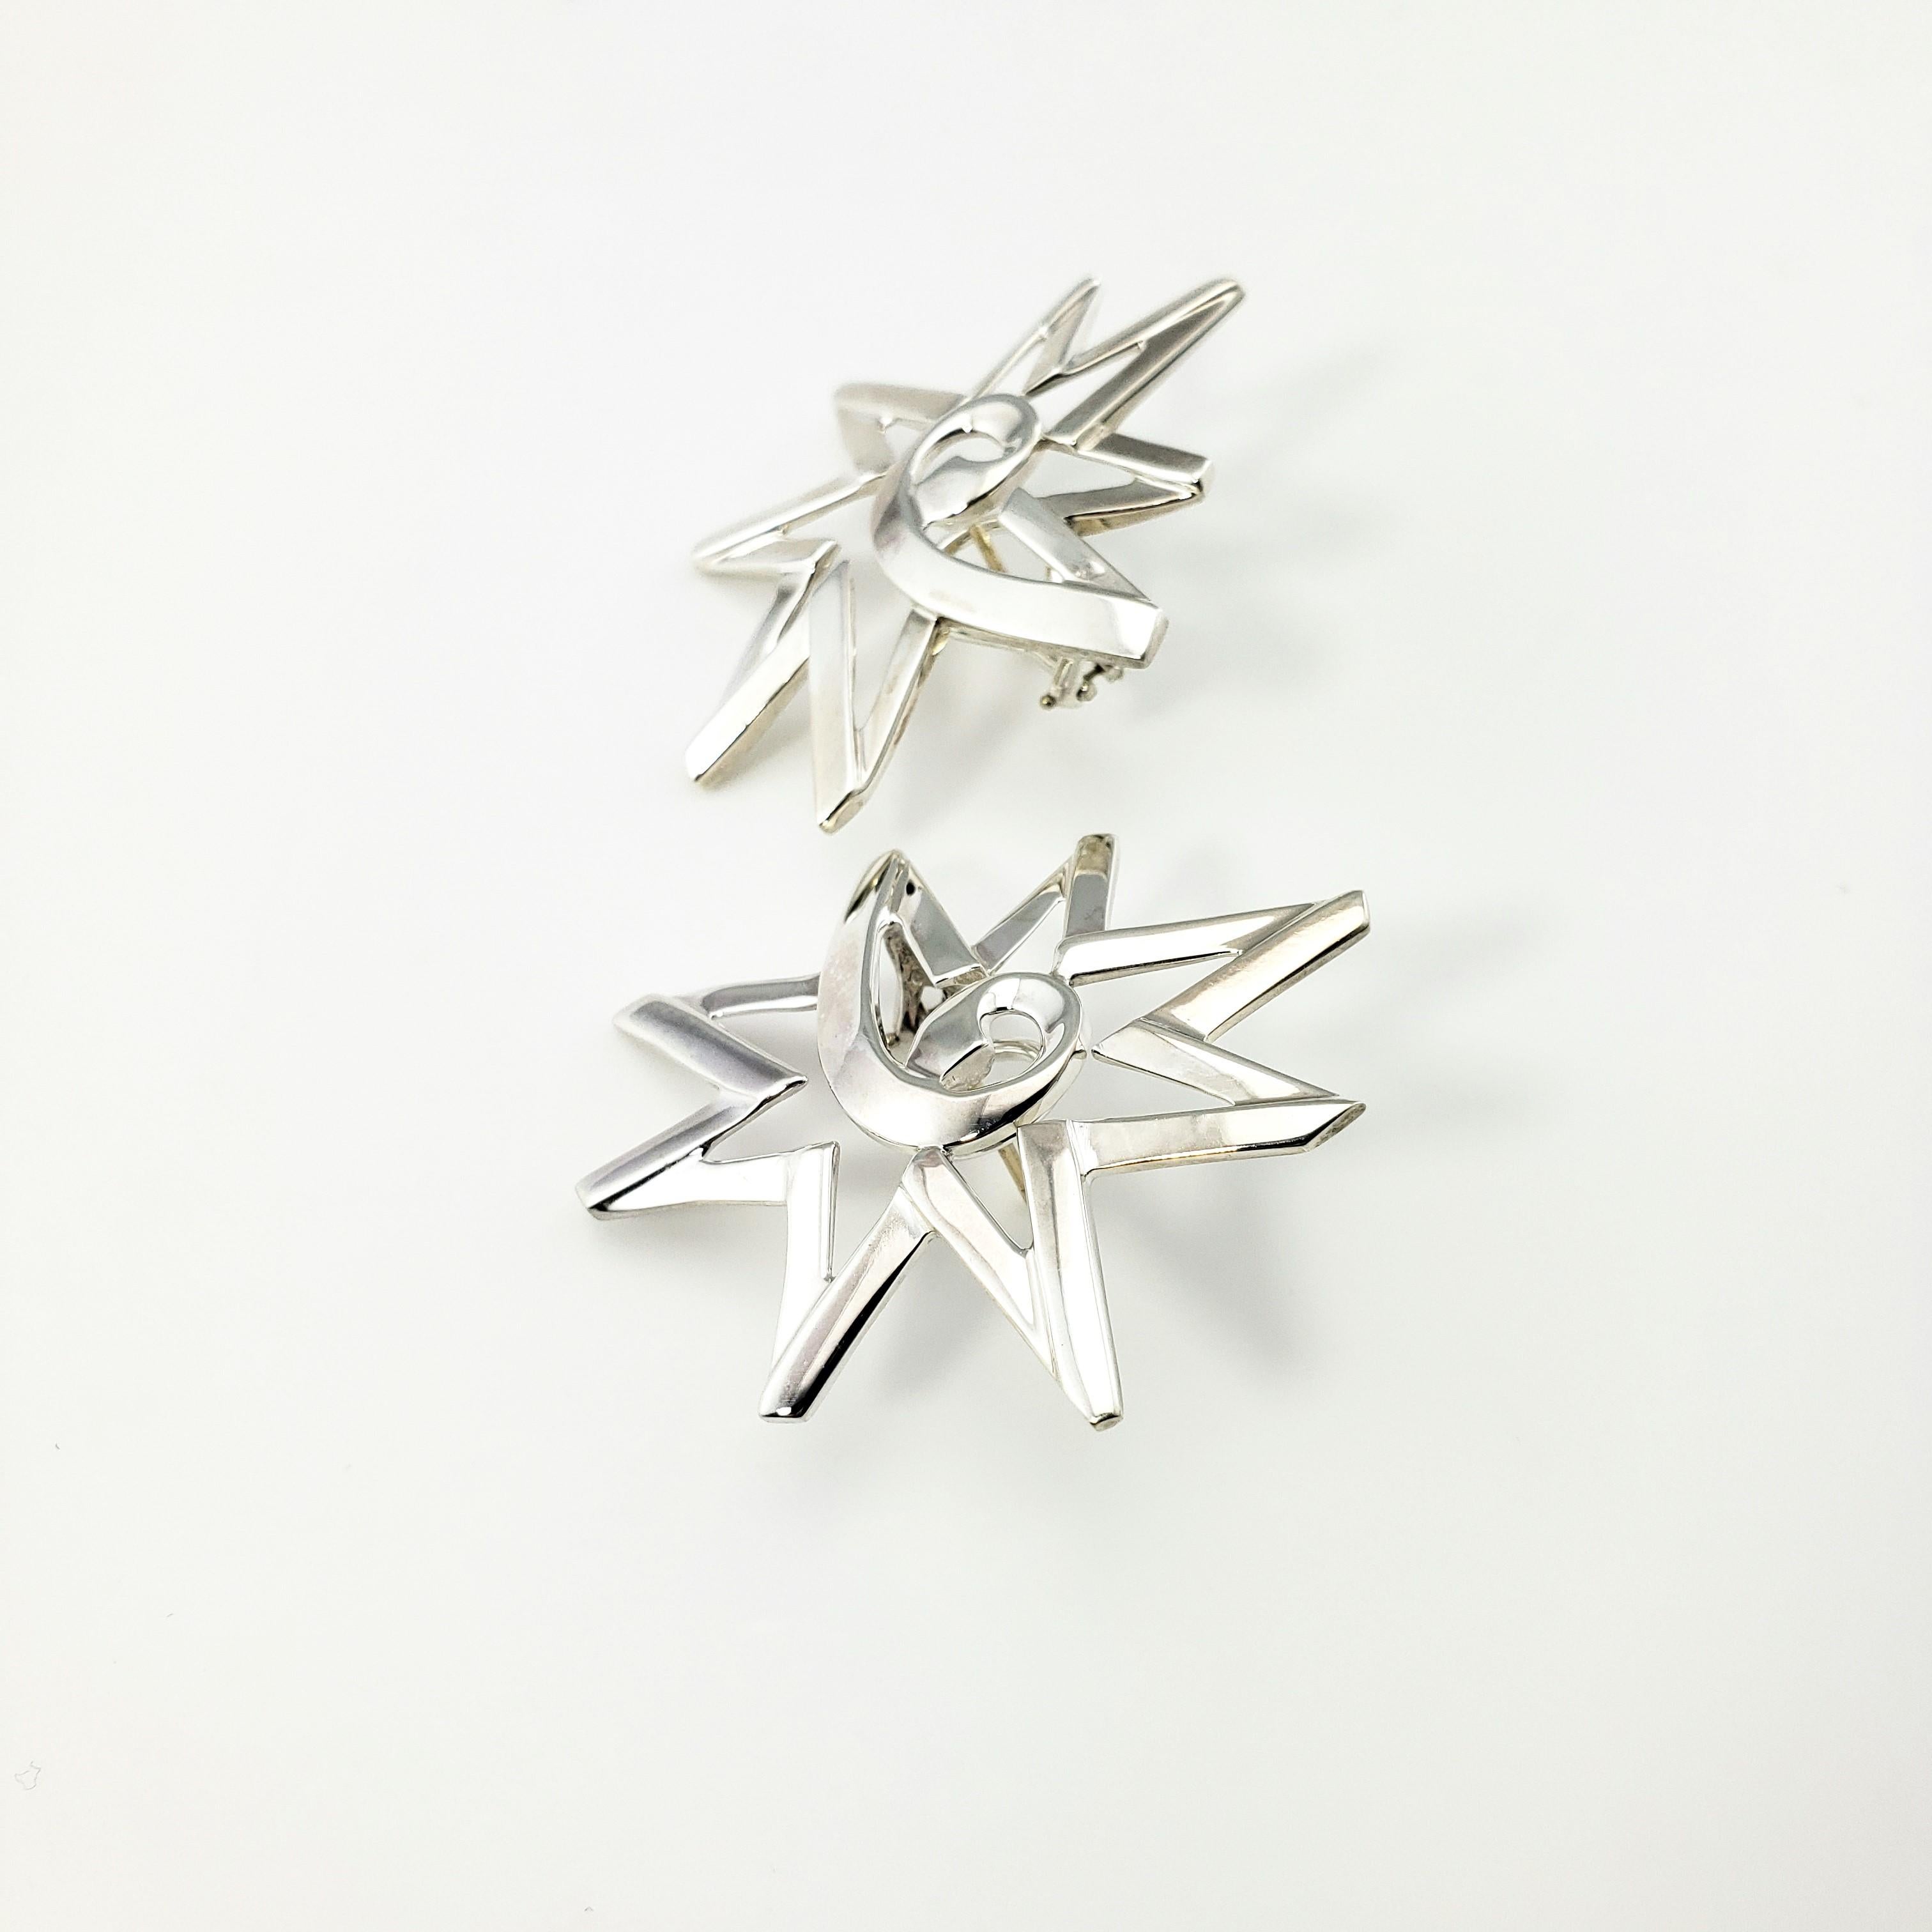 Vintage Tiffany & Co. Paloma Picasso Sterling Silver Starburst Earrings

These stunning earrings are beautifully detailed in sterling silver by Paloma Picasso for Tiffany & Co. Hinged closures.

Size: 43 mm x 38 mm

Weight: 8.8 dwt. / 13.8